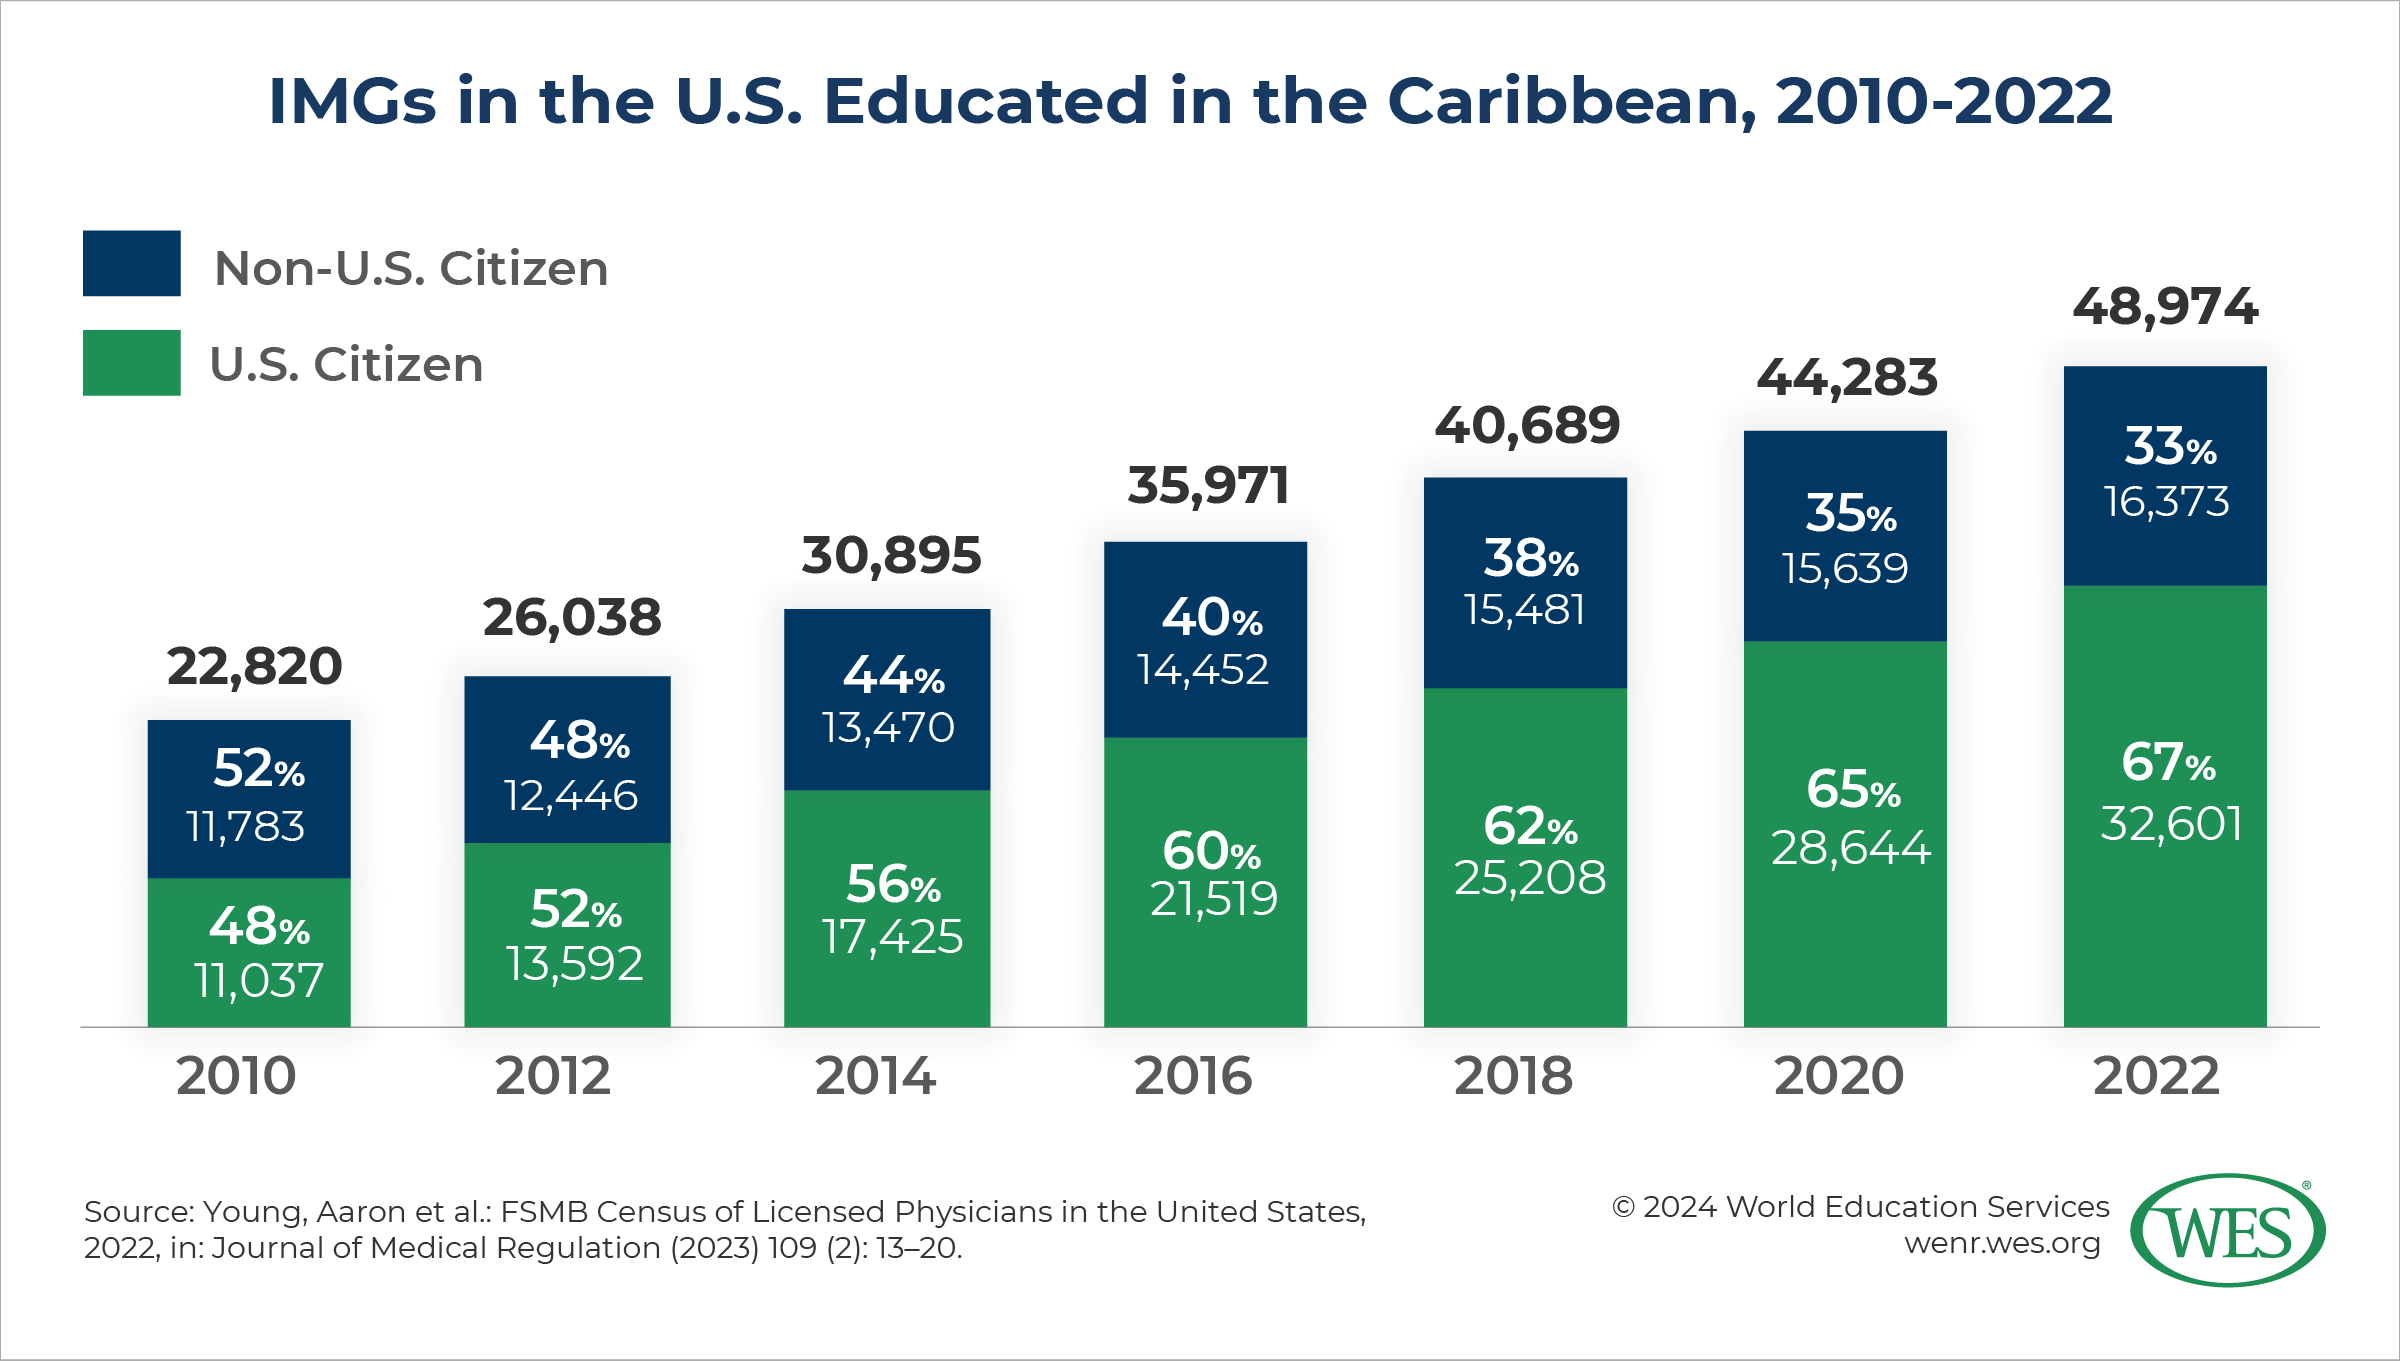 A graphic depicting the number and percentage of international medical graduates in the U.S. that were educated in the Caribbean between 2010 and 2022.